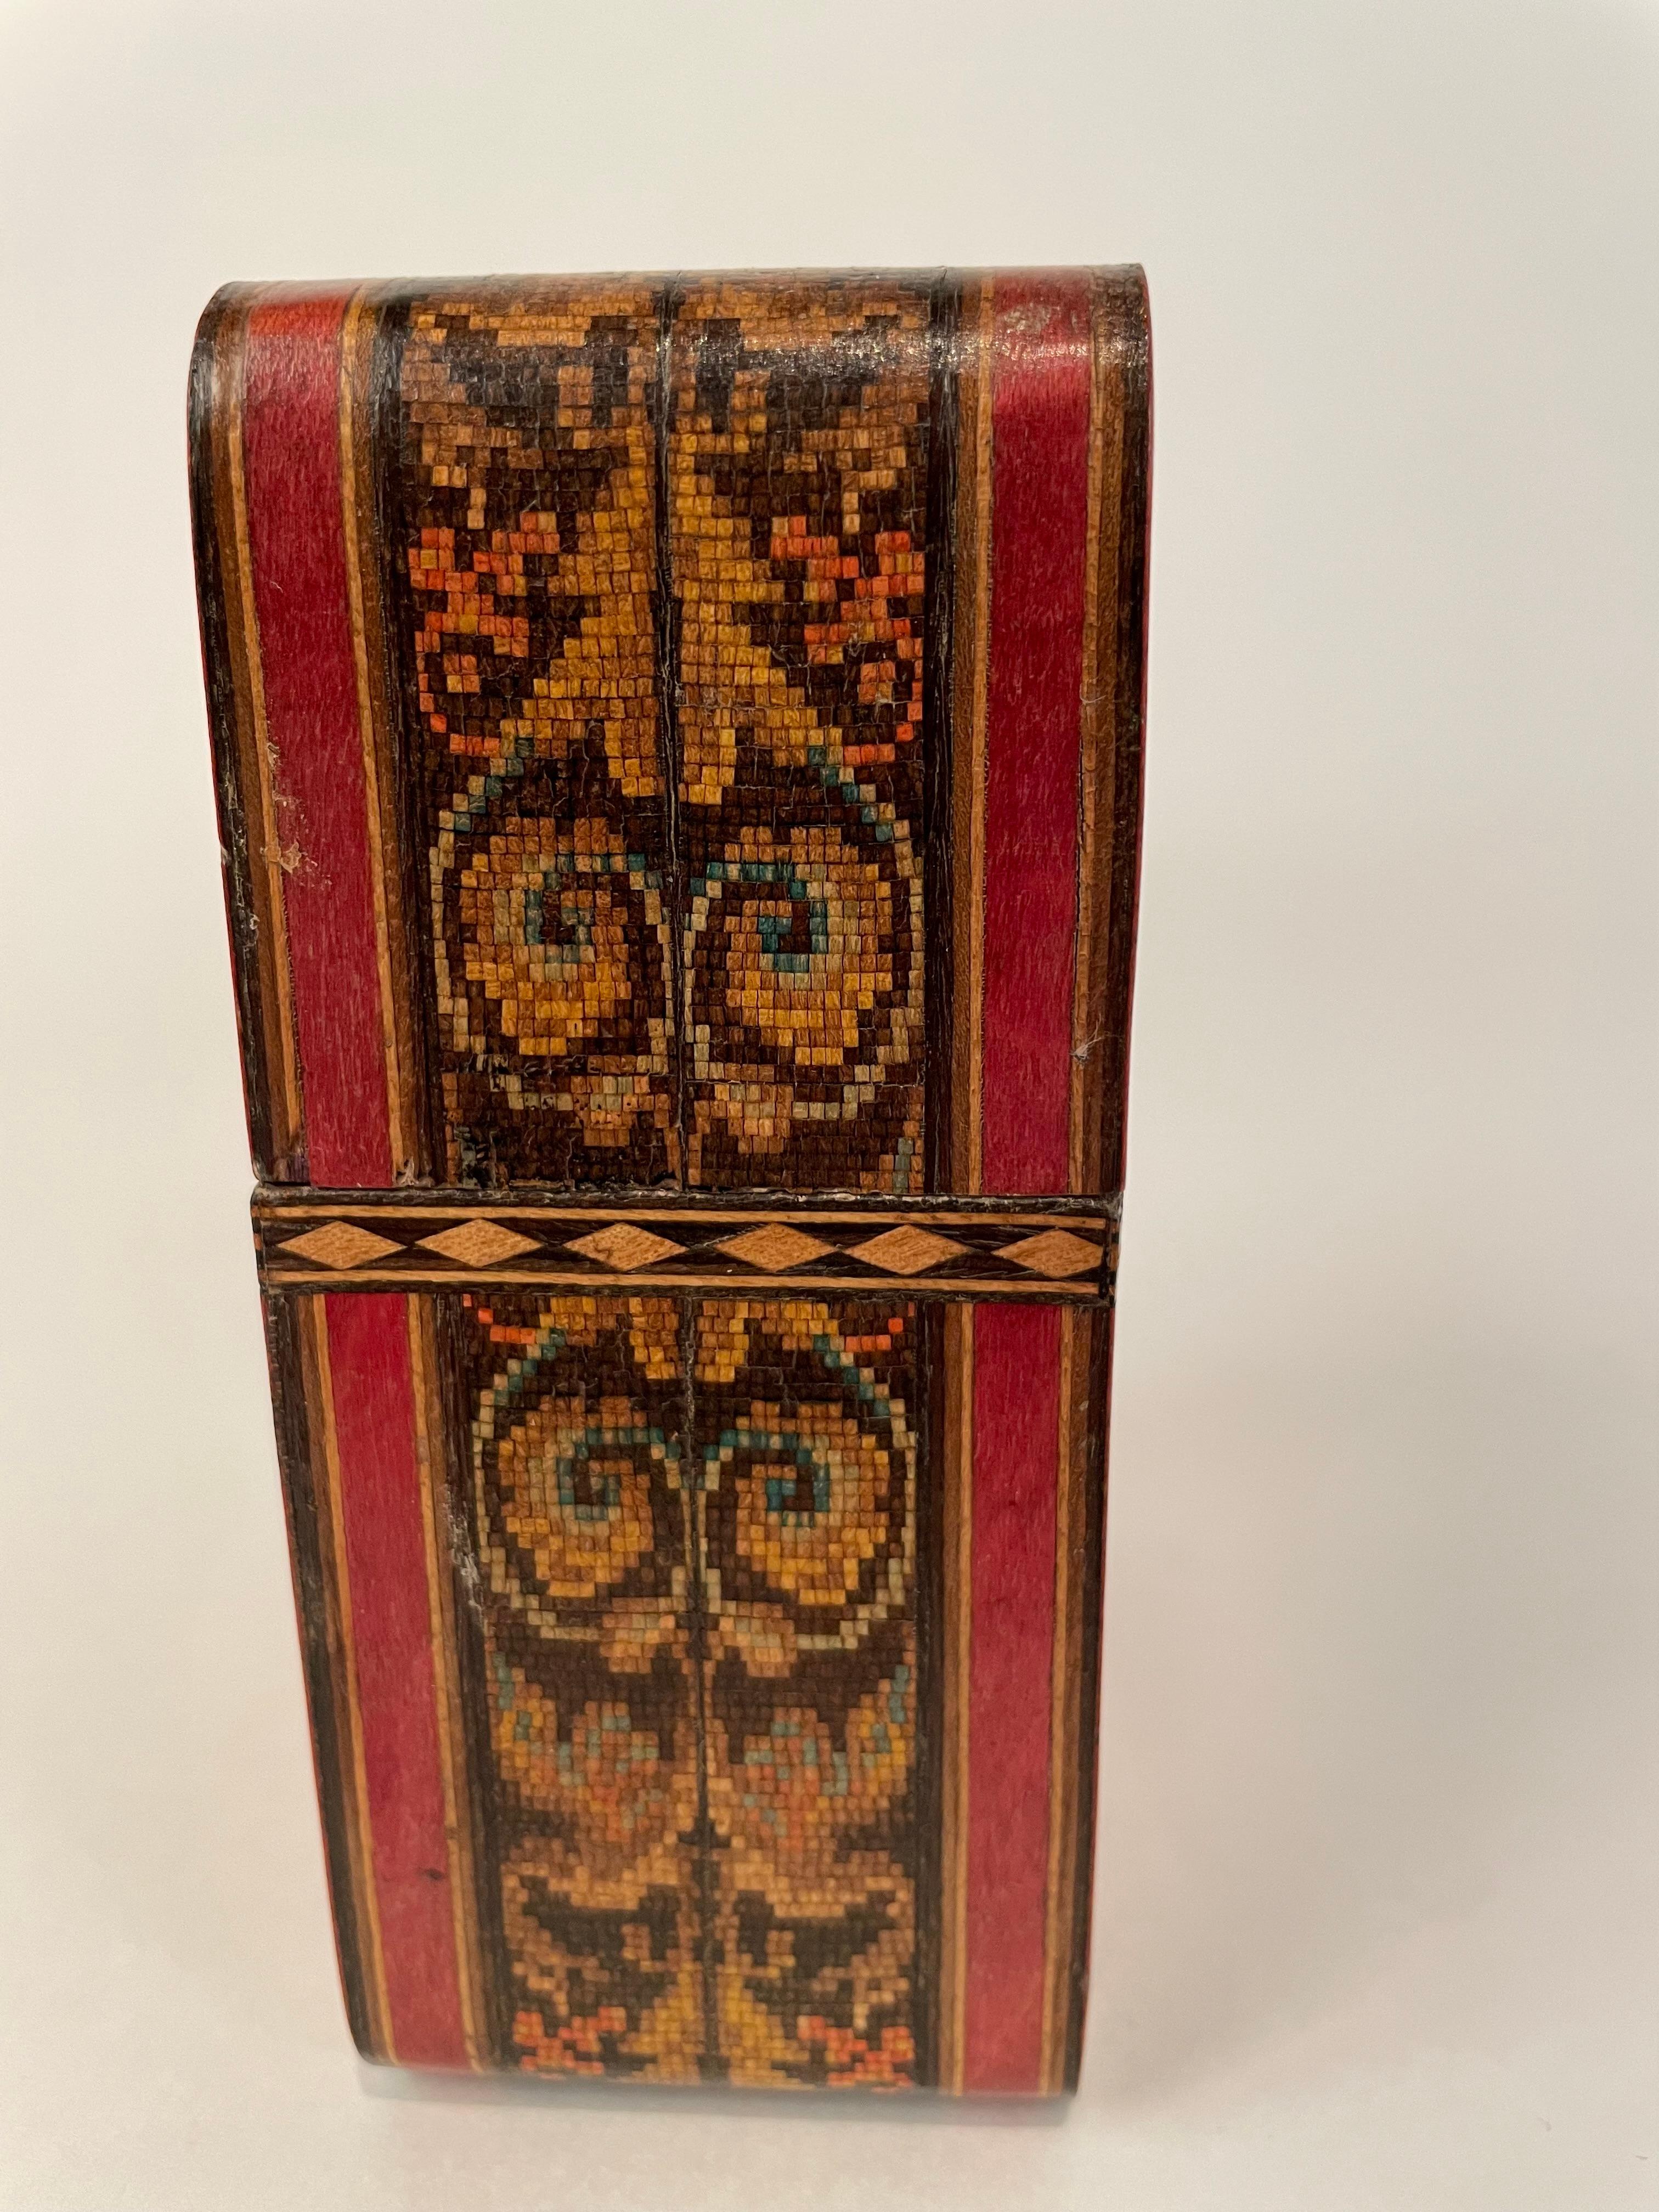 Belle Époque 19th Century Italian Sorrento Inlaid Mosaic Playing Card Case